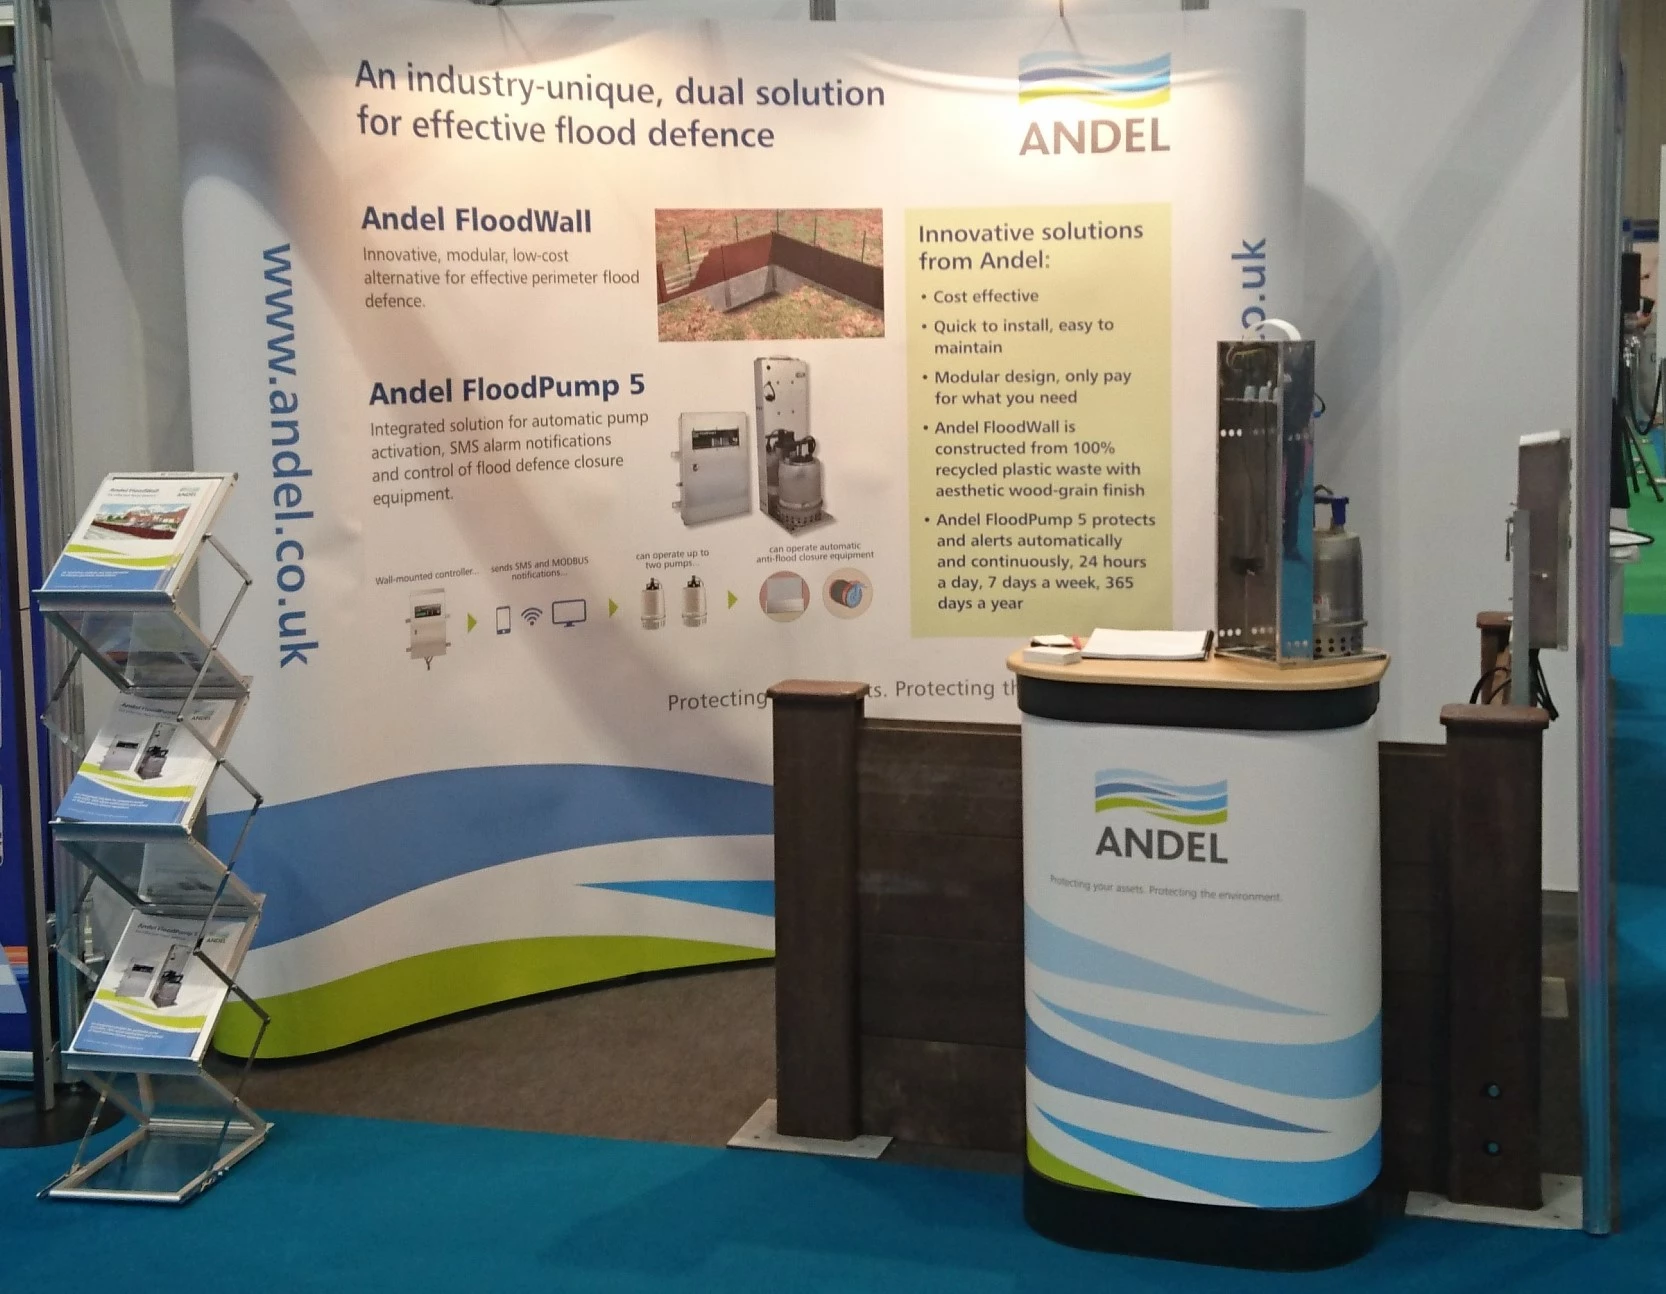 Huddersfield-based Andel showcased two new flood defence products - Andel FloodWall and Andel FloodPump 5 - at Birmingham's FloodExpo in September